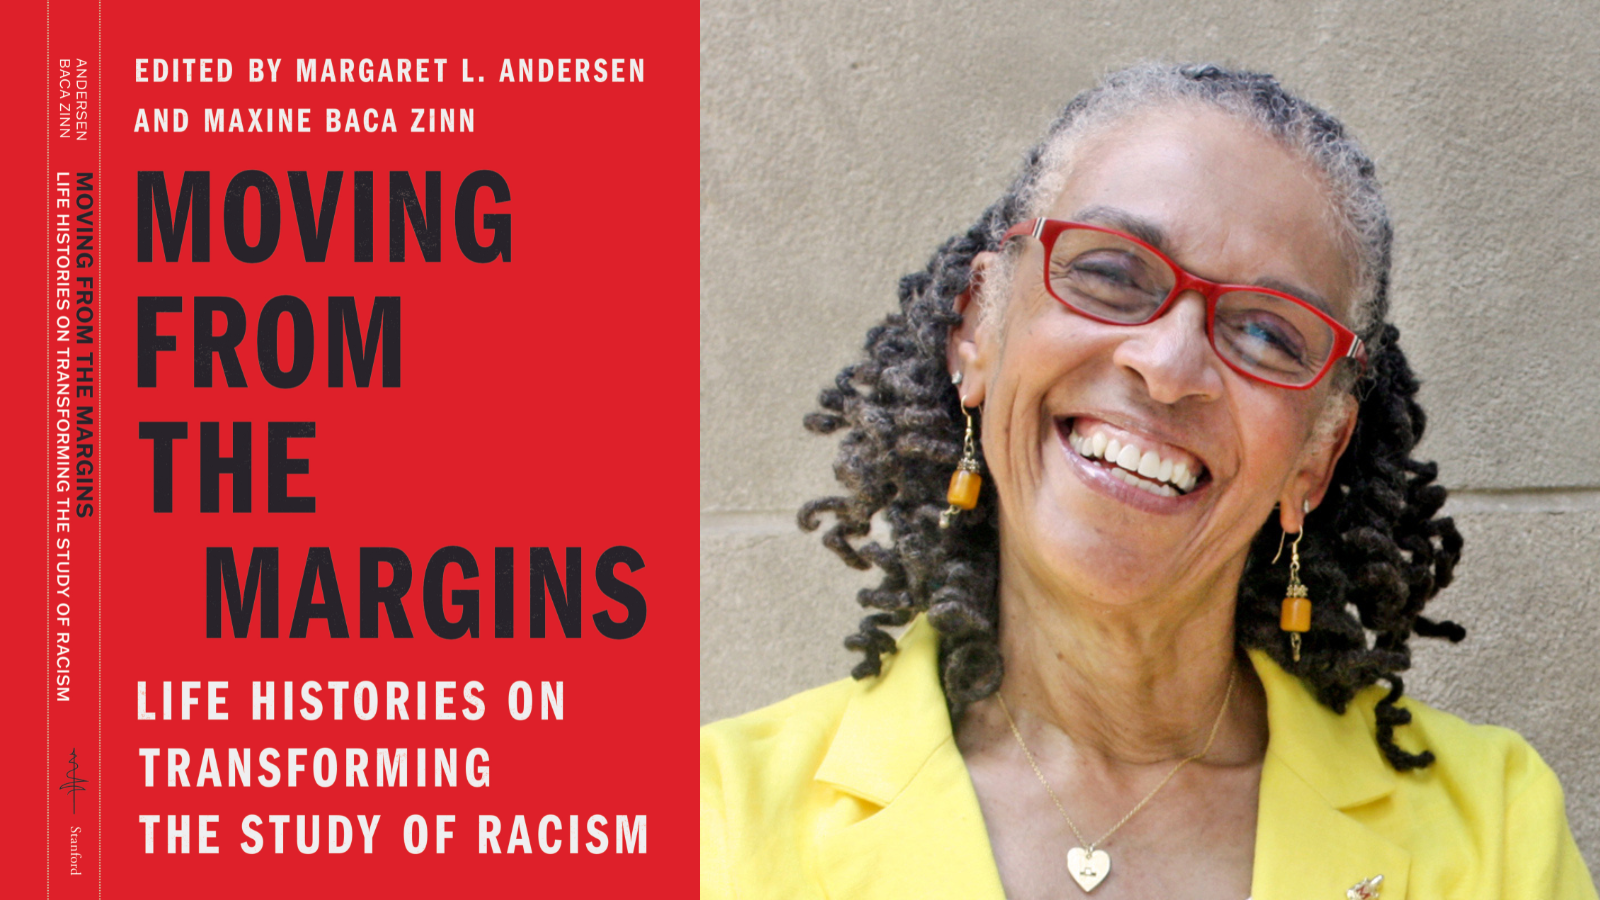 Bonnie Thornton Dill smiles next to an image of the new book Moving From the Margins: Life Histories On Transforming the Study of Racism